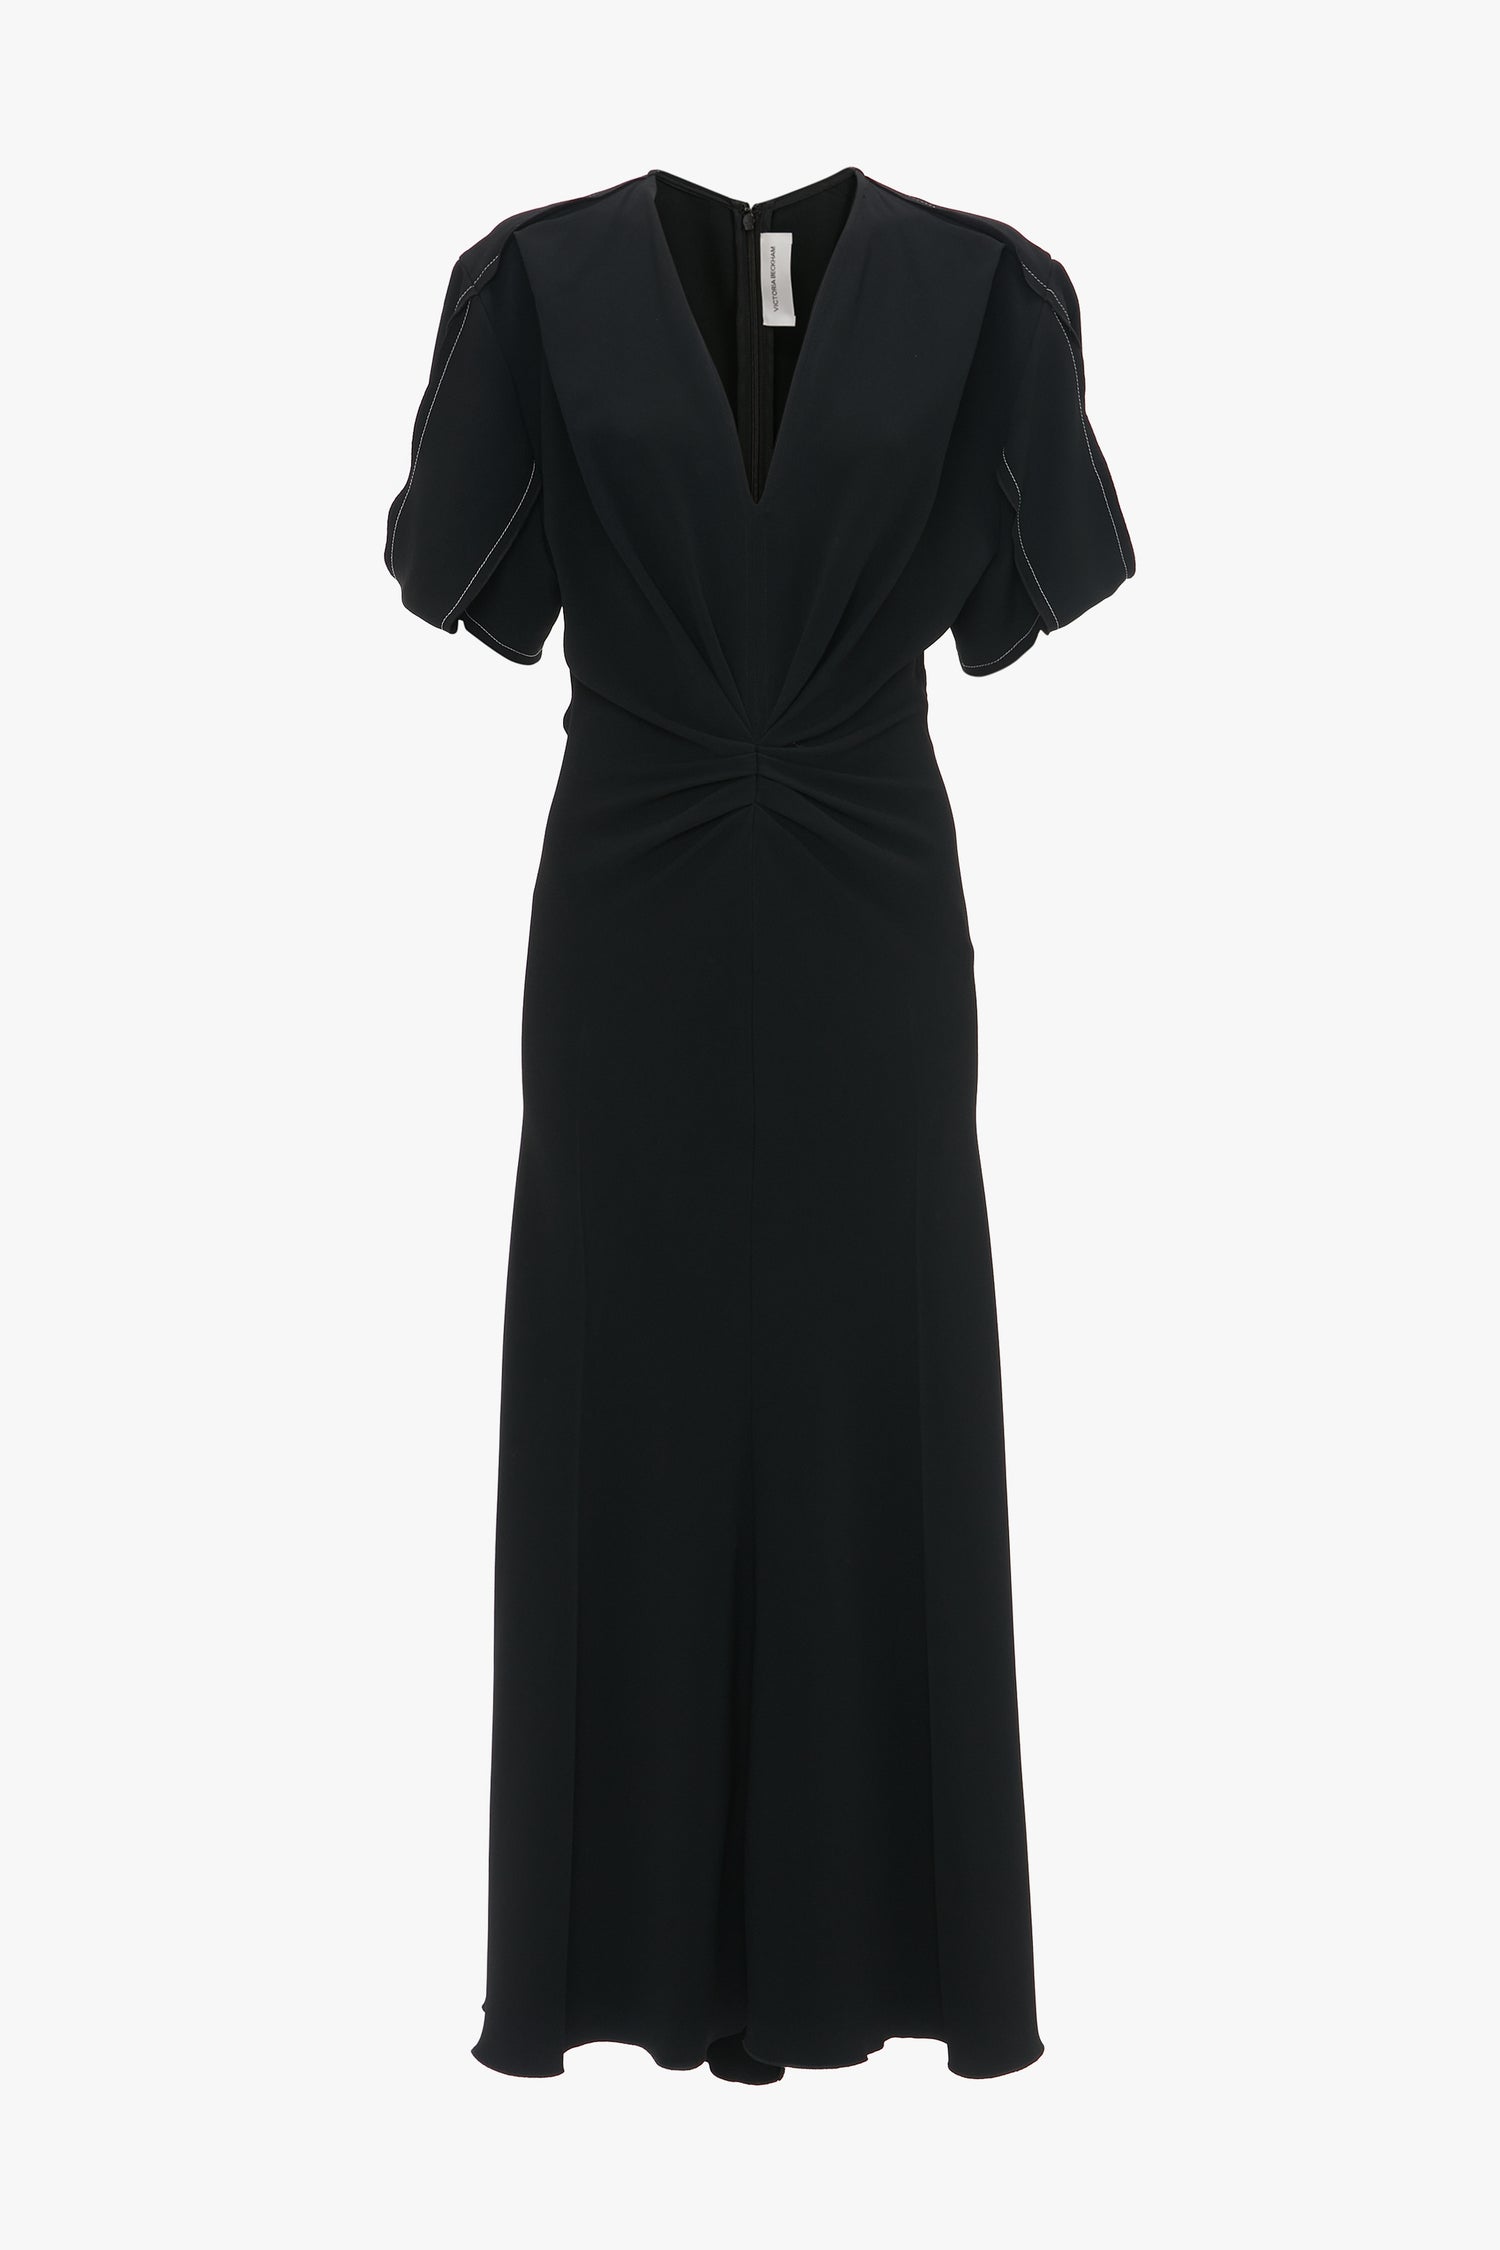 Victoria Beckham Gathered V-Neck Midi Dress in Black featuring short puff sleeves, V-neckline, and gathered waist detail in figure-flattering stretch fabric, isolated on a white background.